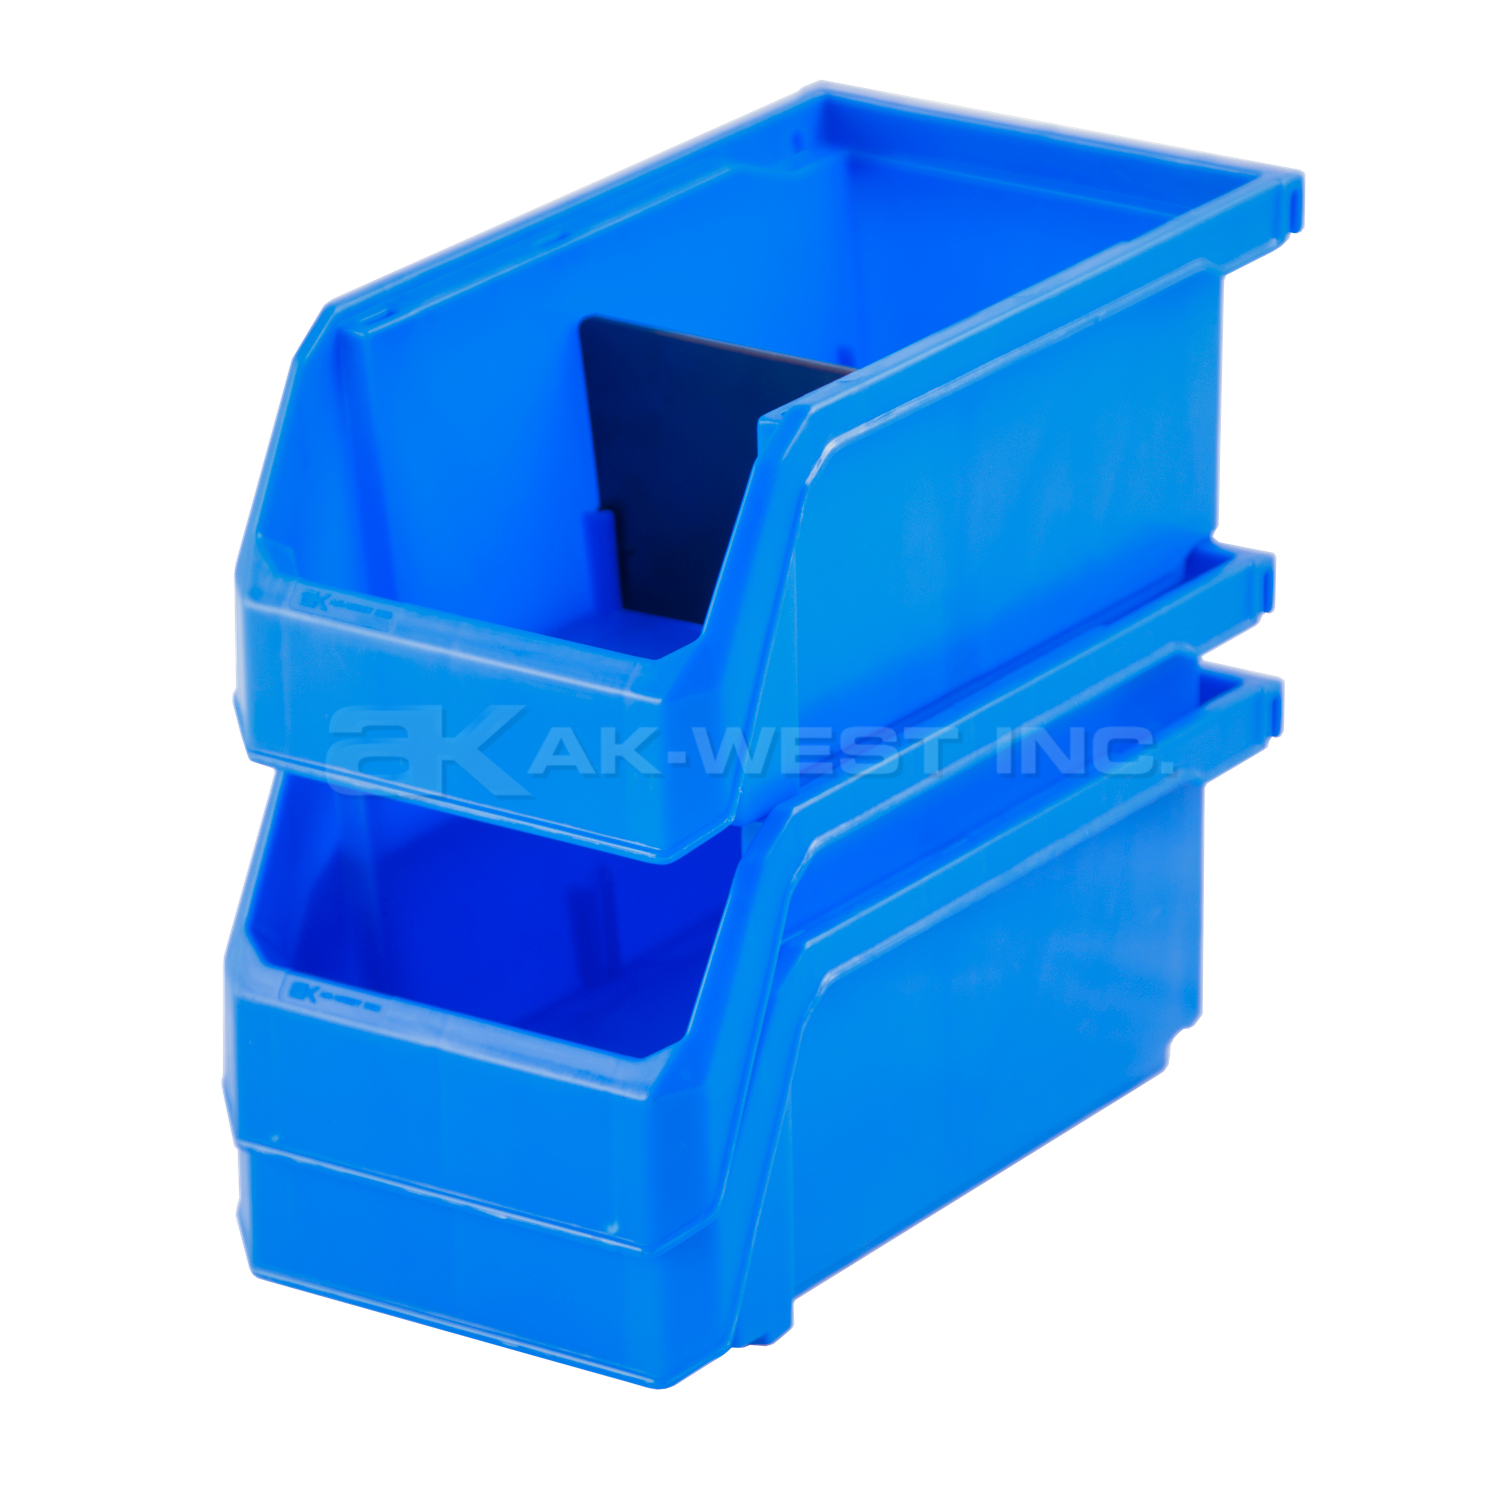 Blue, 7-3/8" x 4-1/8" x 3" Hanging, Stacking and Nesting Bin (Equivalent Size To 30220)